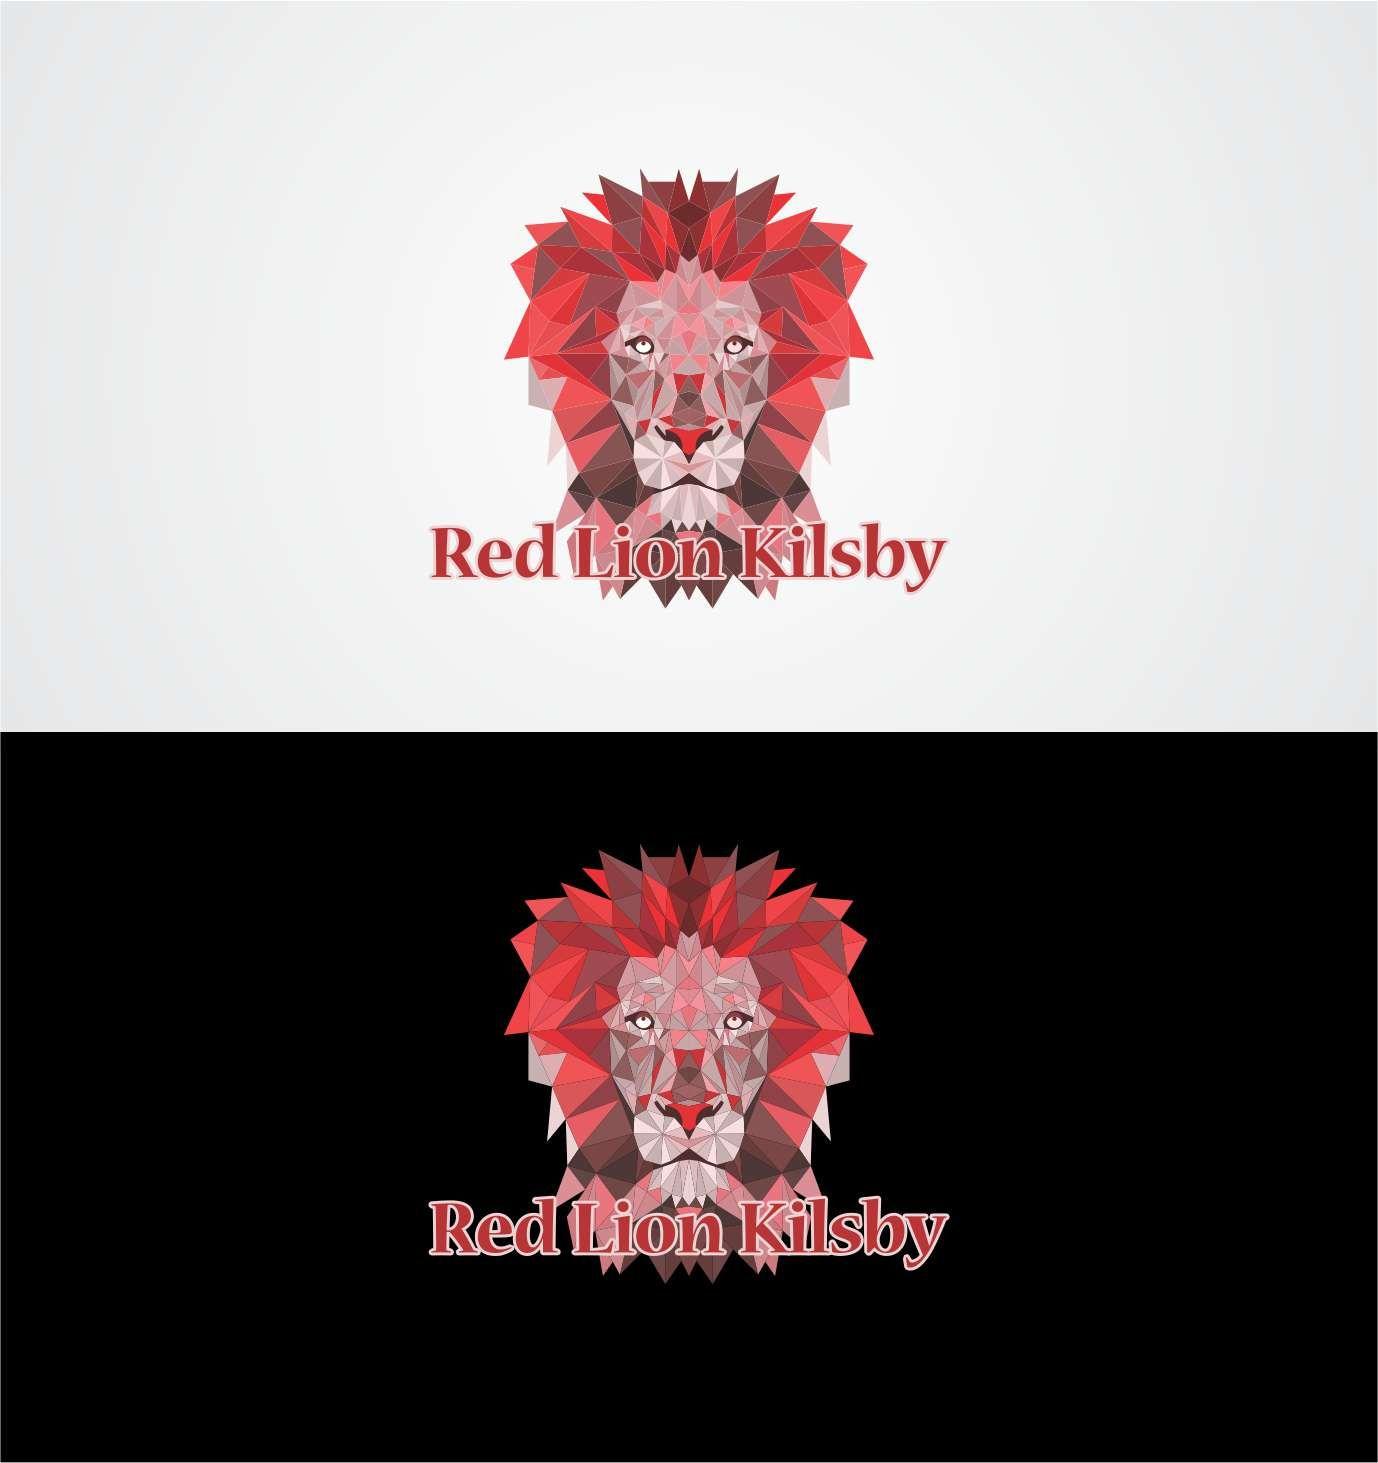 Red Lion Company Logo - Business Logo Design for Red Lion Kilsby by LauraPol. Design